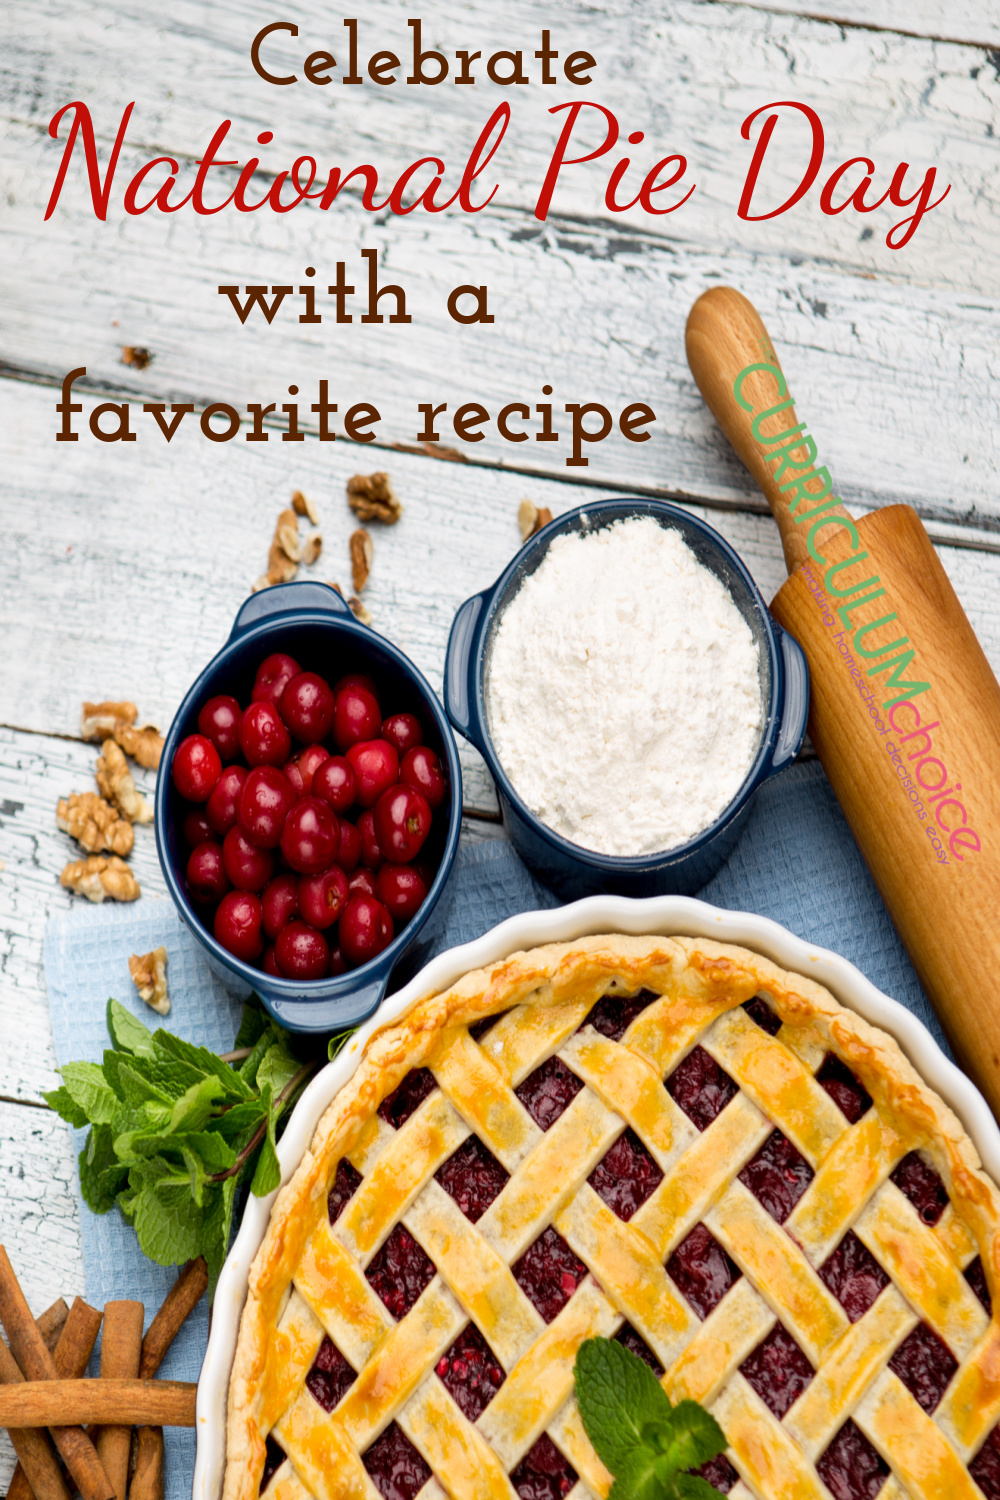 Celebrate National Pie Day by making your favorite pie! Looking for fresh ideas, try one of our favorite pie recipes!